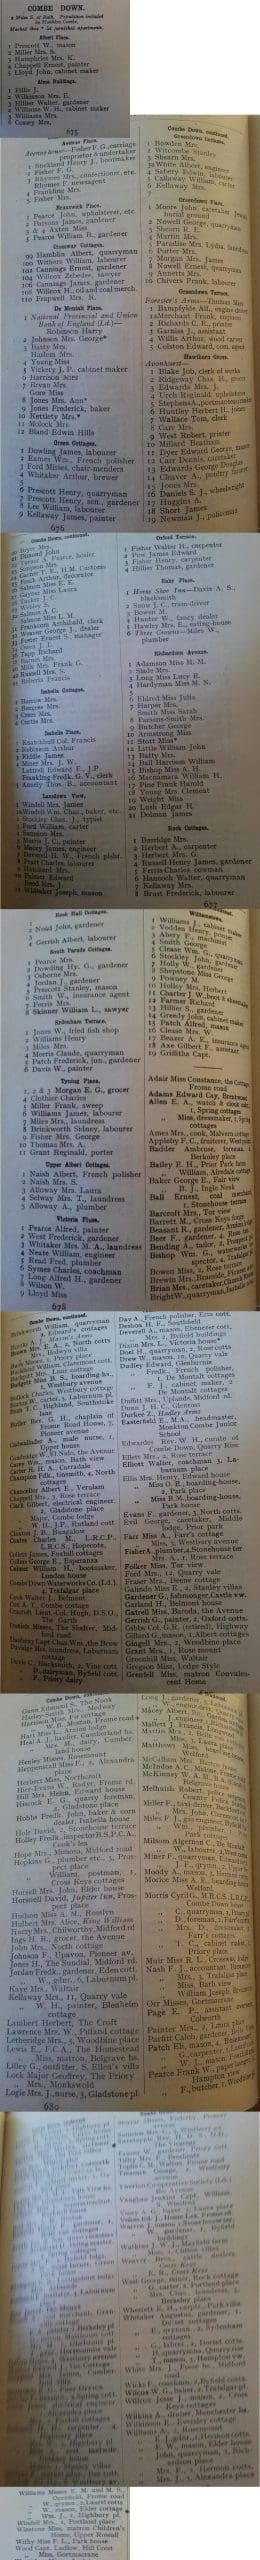 1920 Post Office Directory for Combe Down